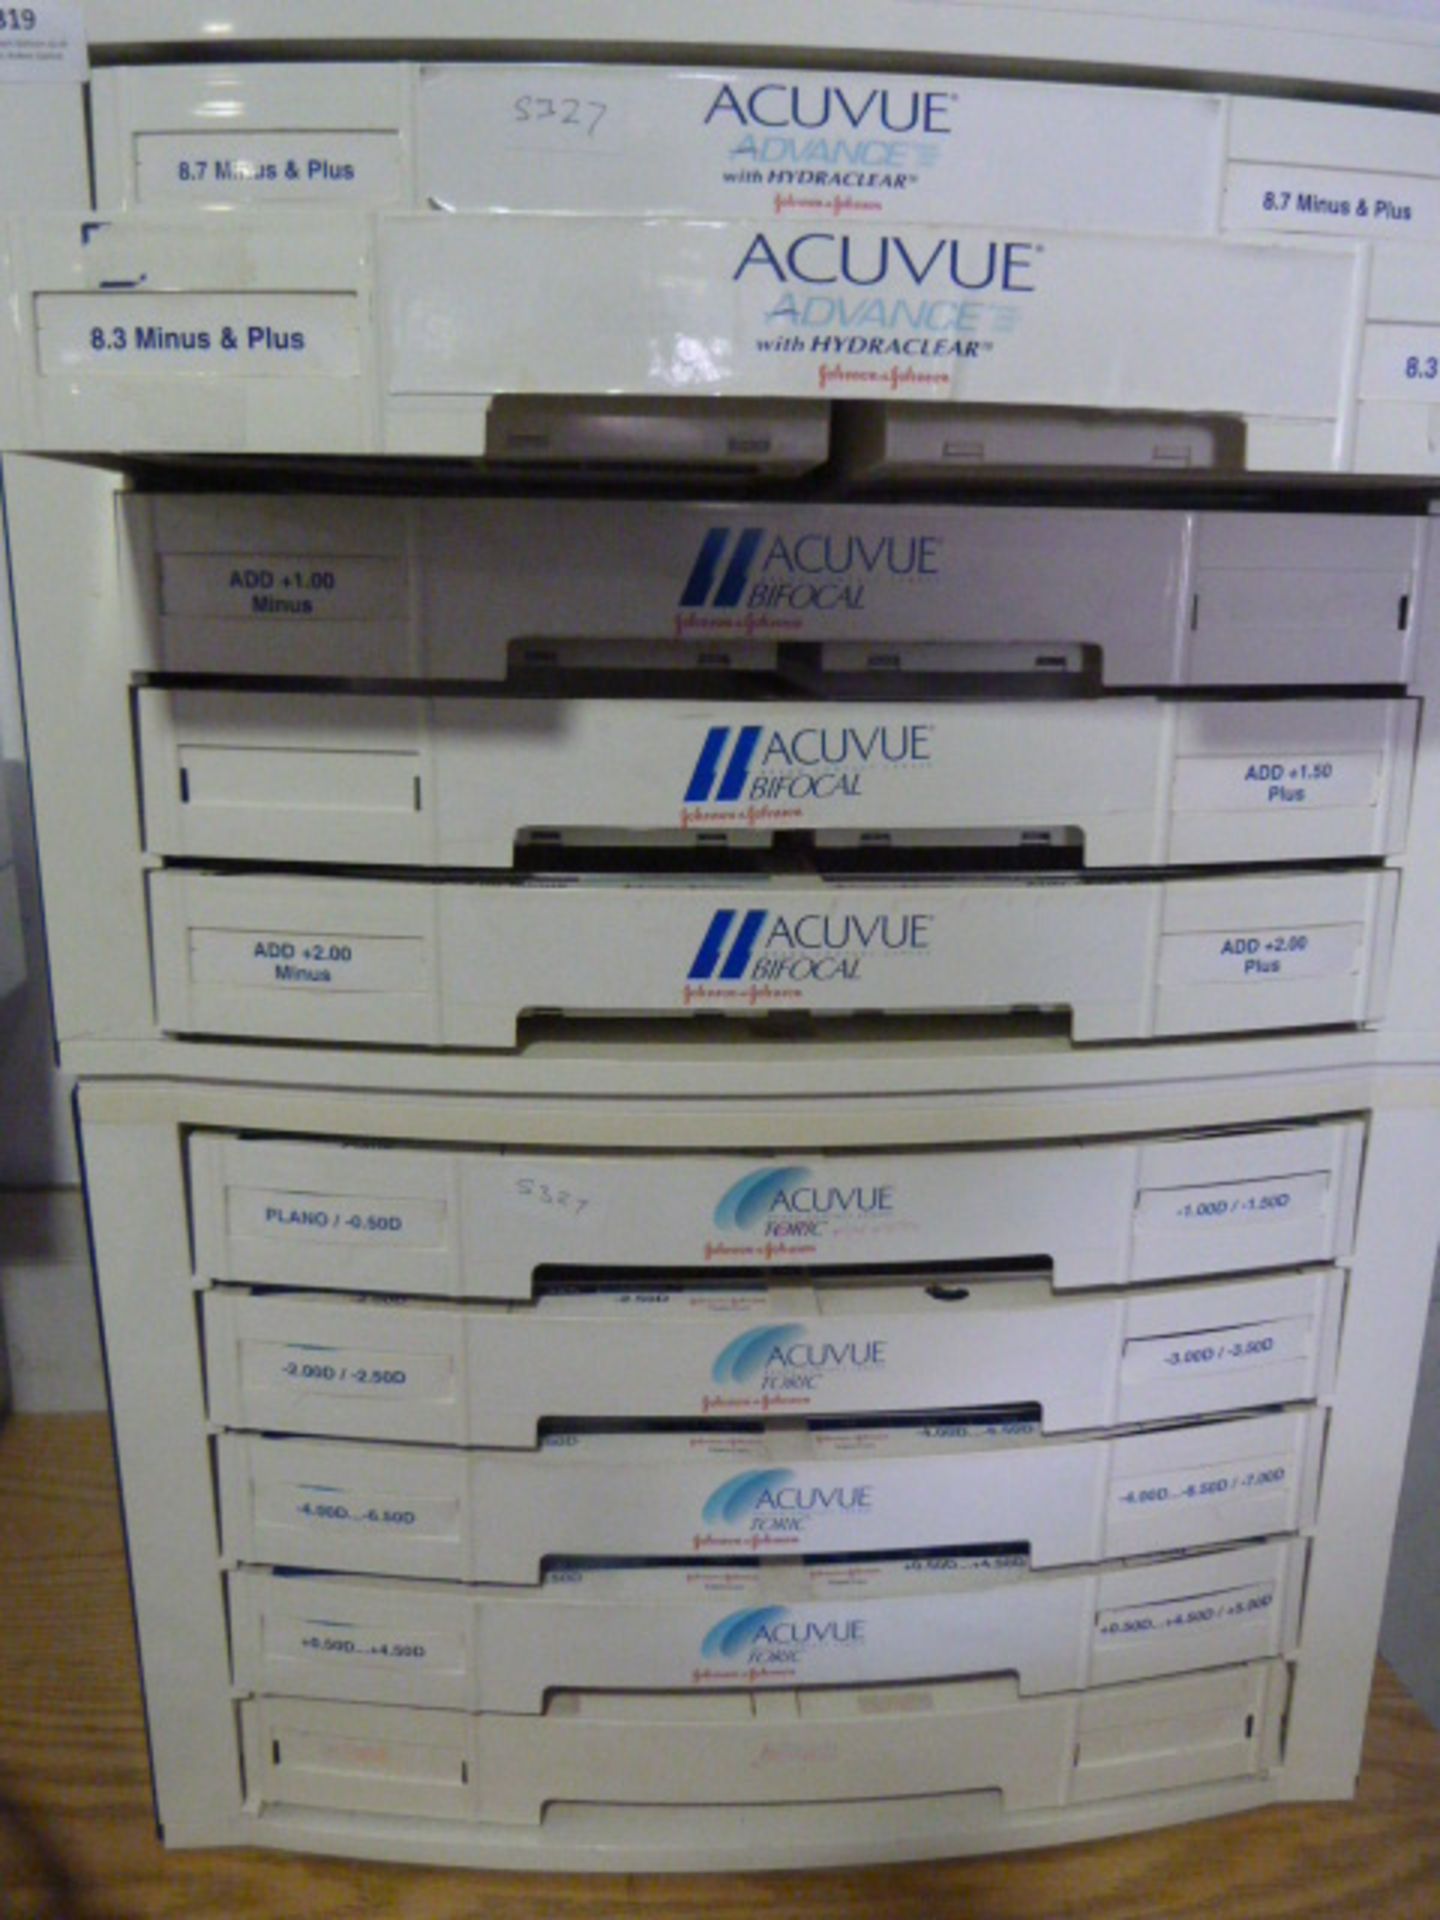 *Two Sets of Acuvue Storage Drawers Containing One